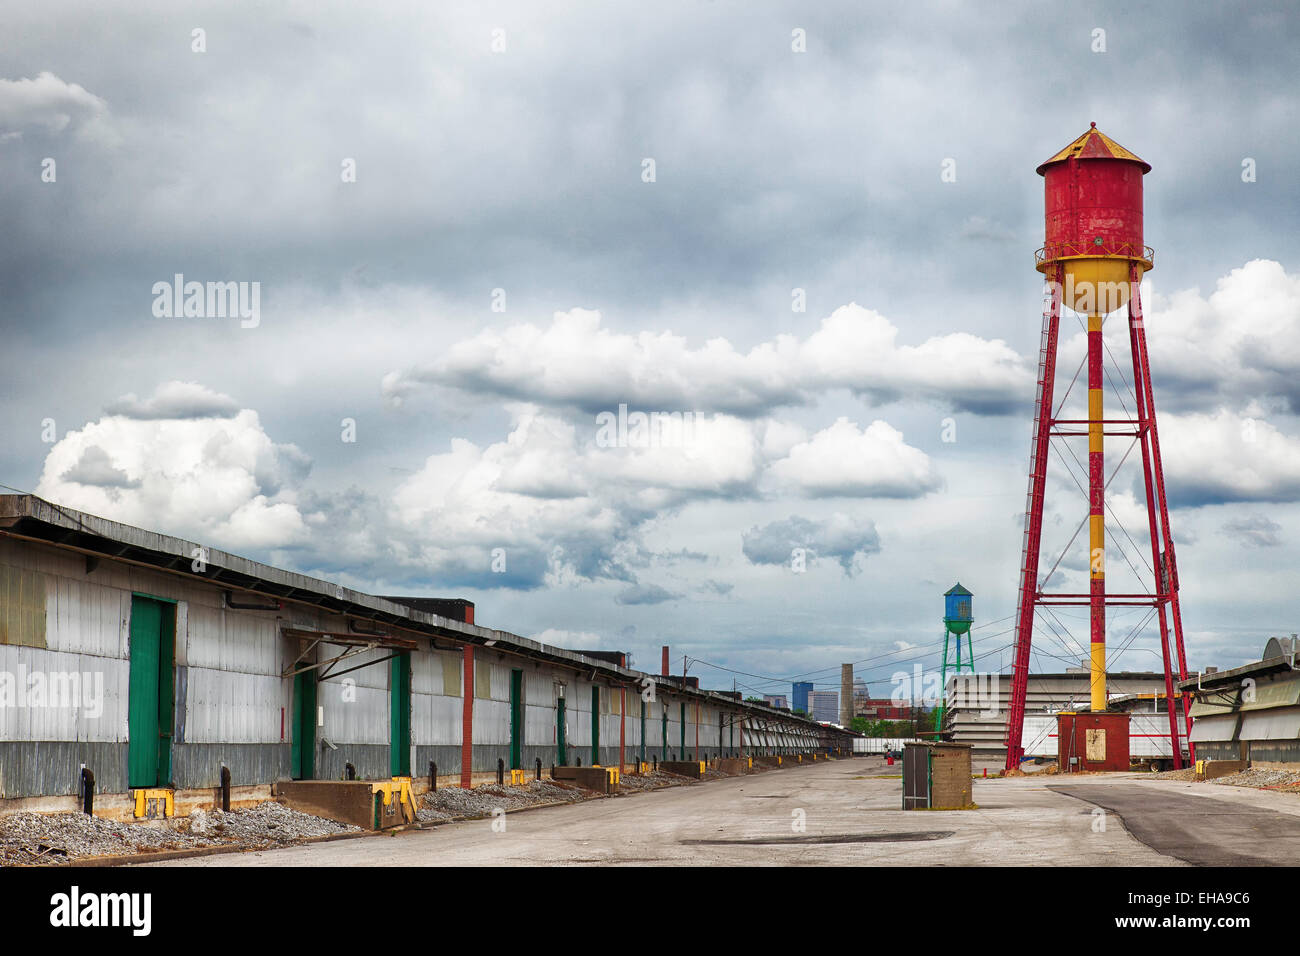 Two water towers in an abandoned warehouse district with garages and clouds in the sky. Stock Photo